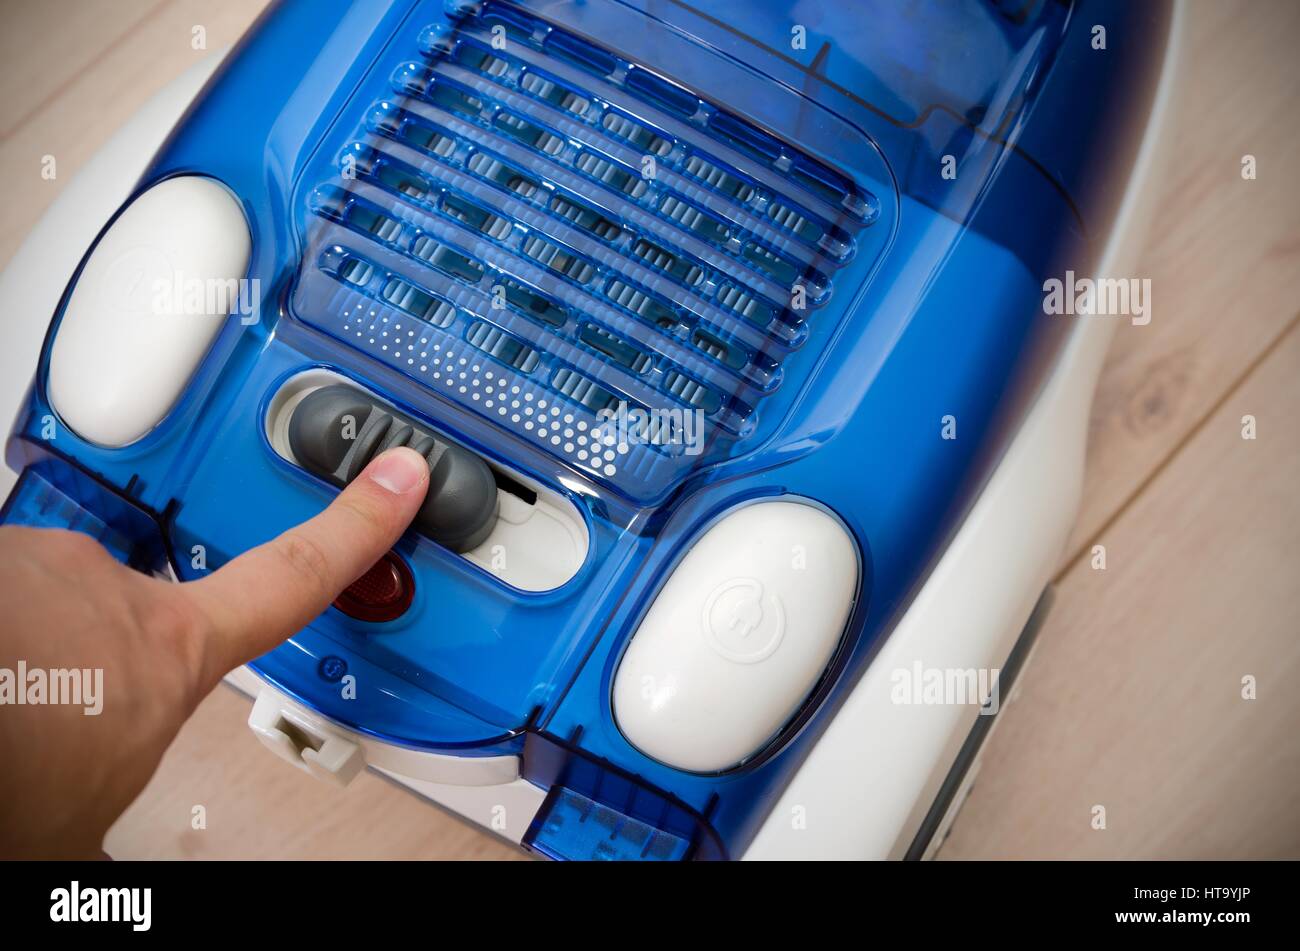 Hand switch sets the power efficiency of the vacuum cleaner. Energy saving and efficiency appliances. Stock Photo